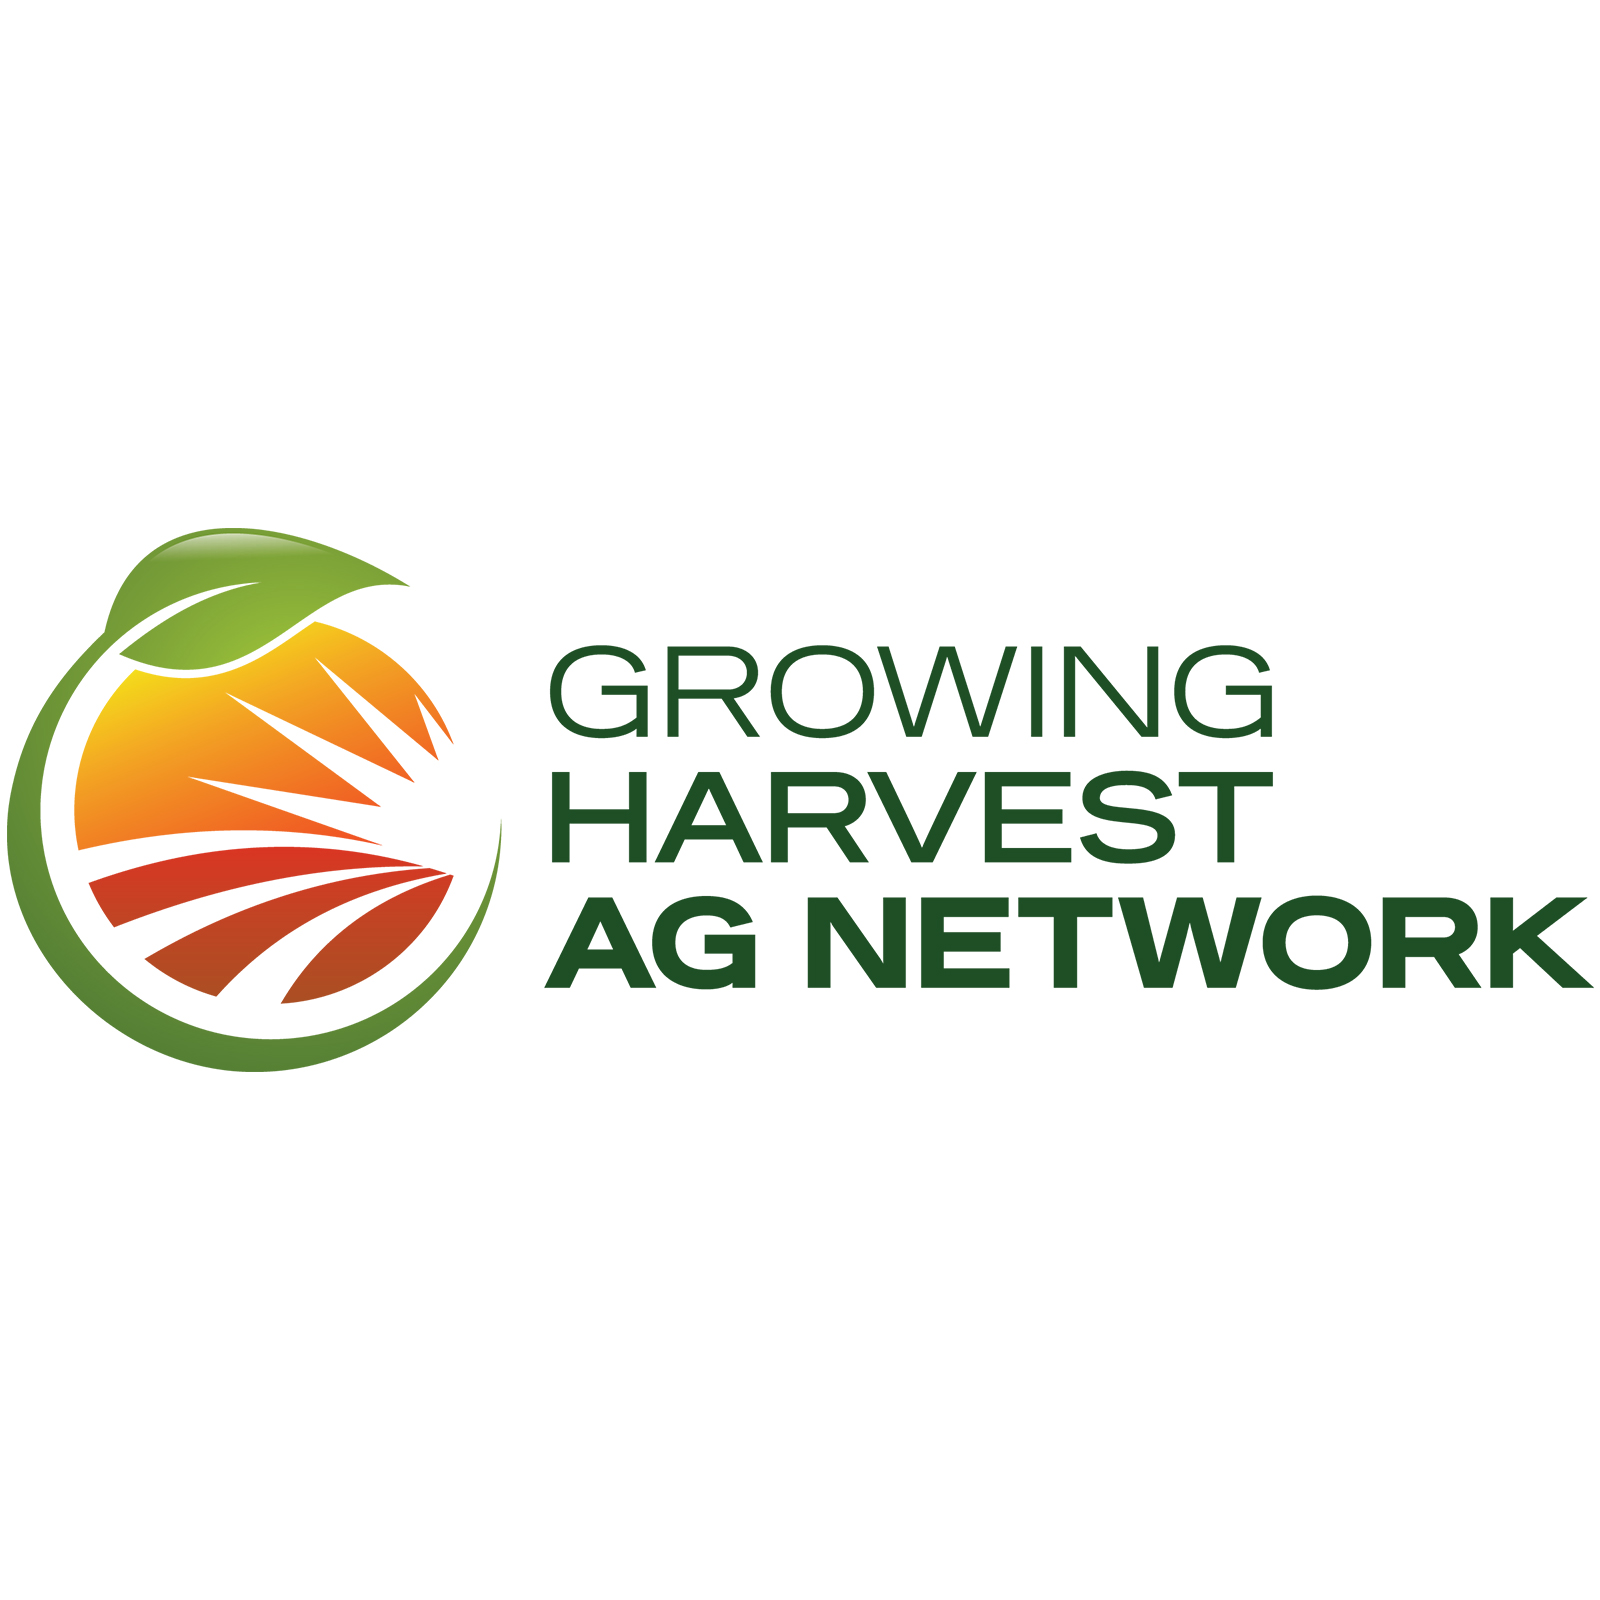 The AgriBiz Show, March 27: This week's look at innovations in agriculture, with host Rusty Halvorson